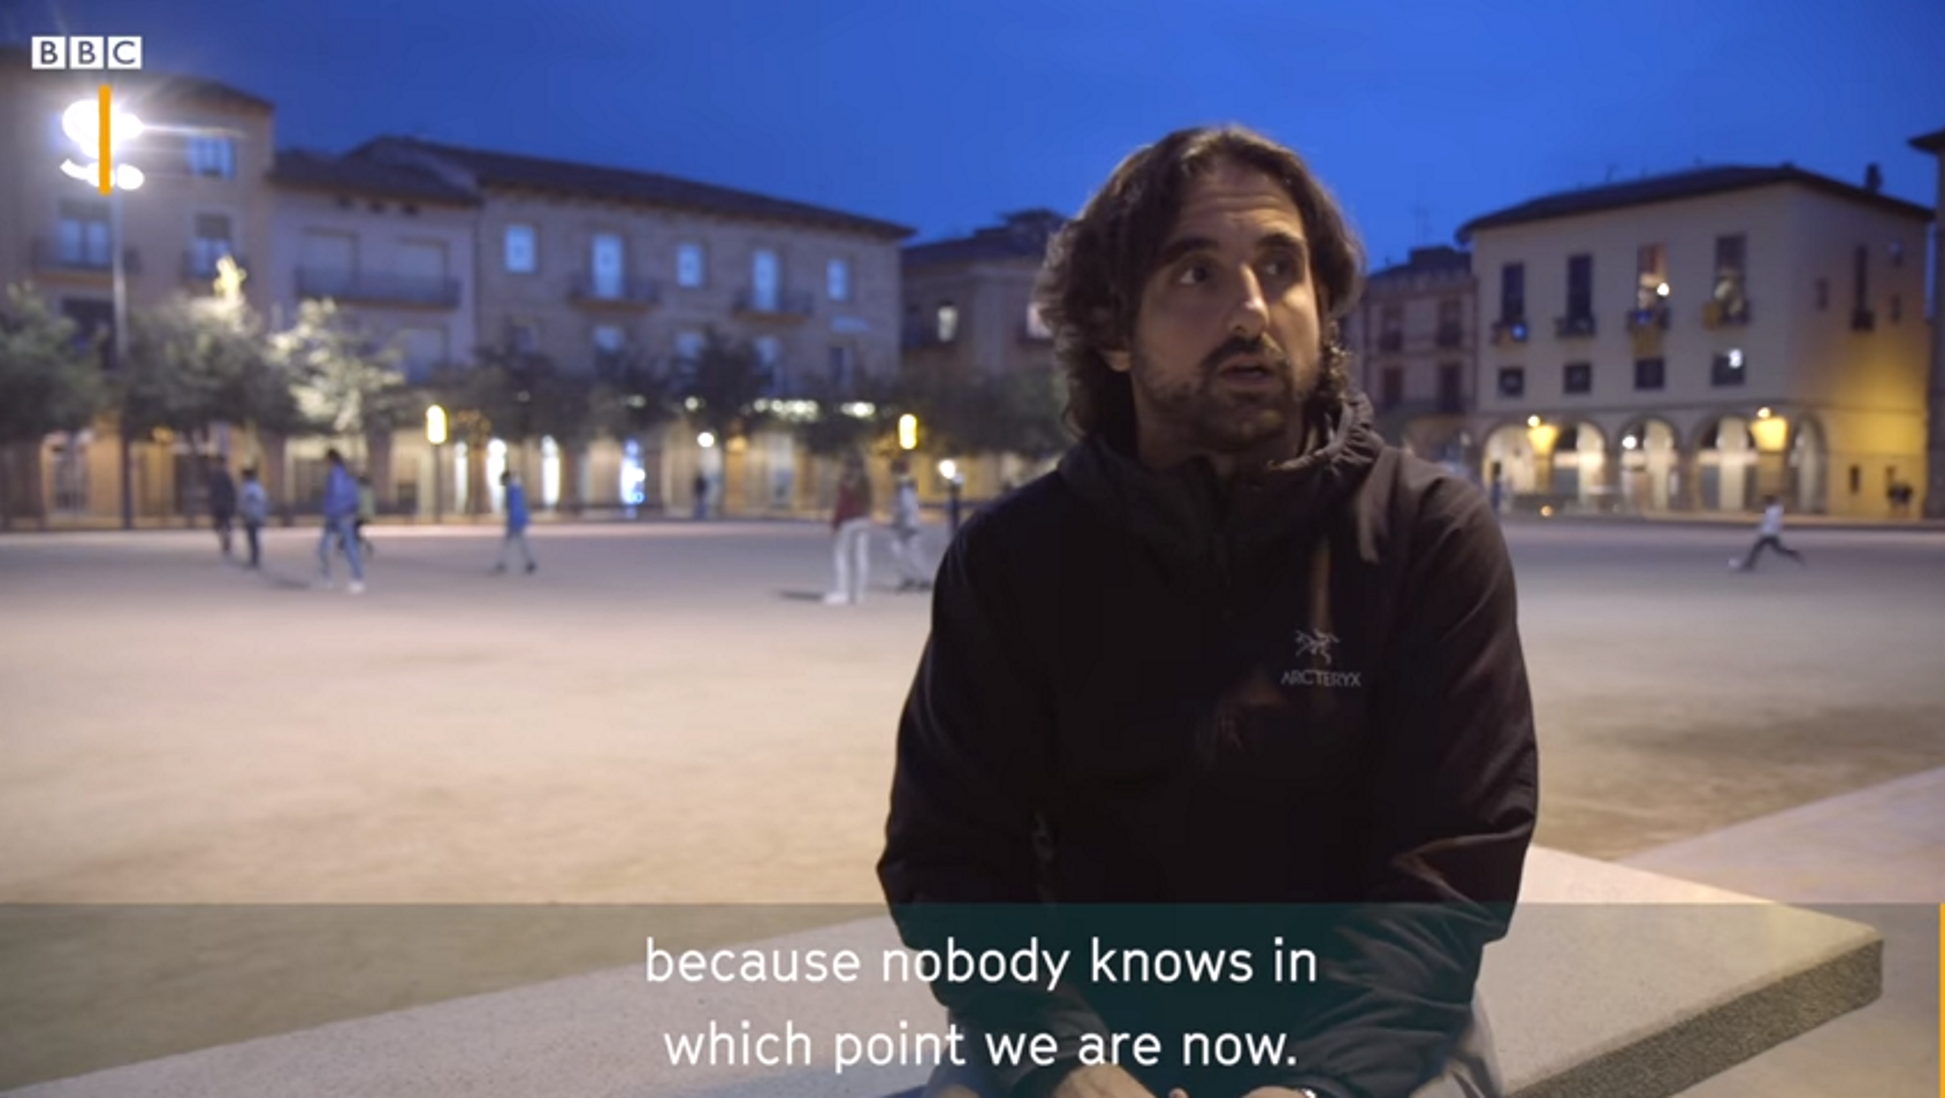 The BBC investigates whether Catalonia is an independent country